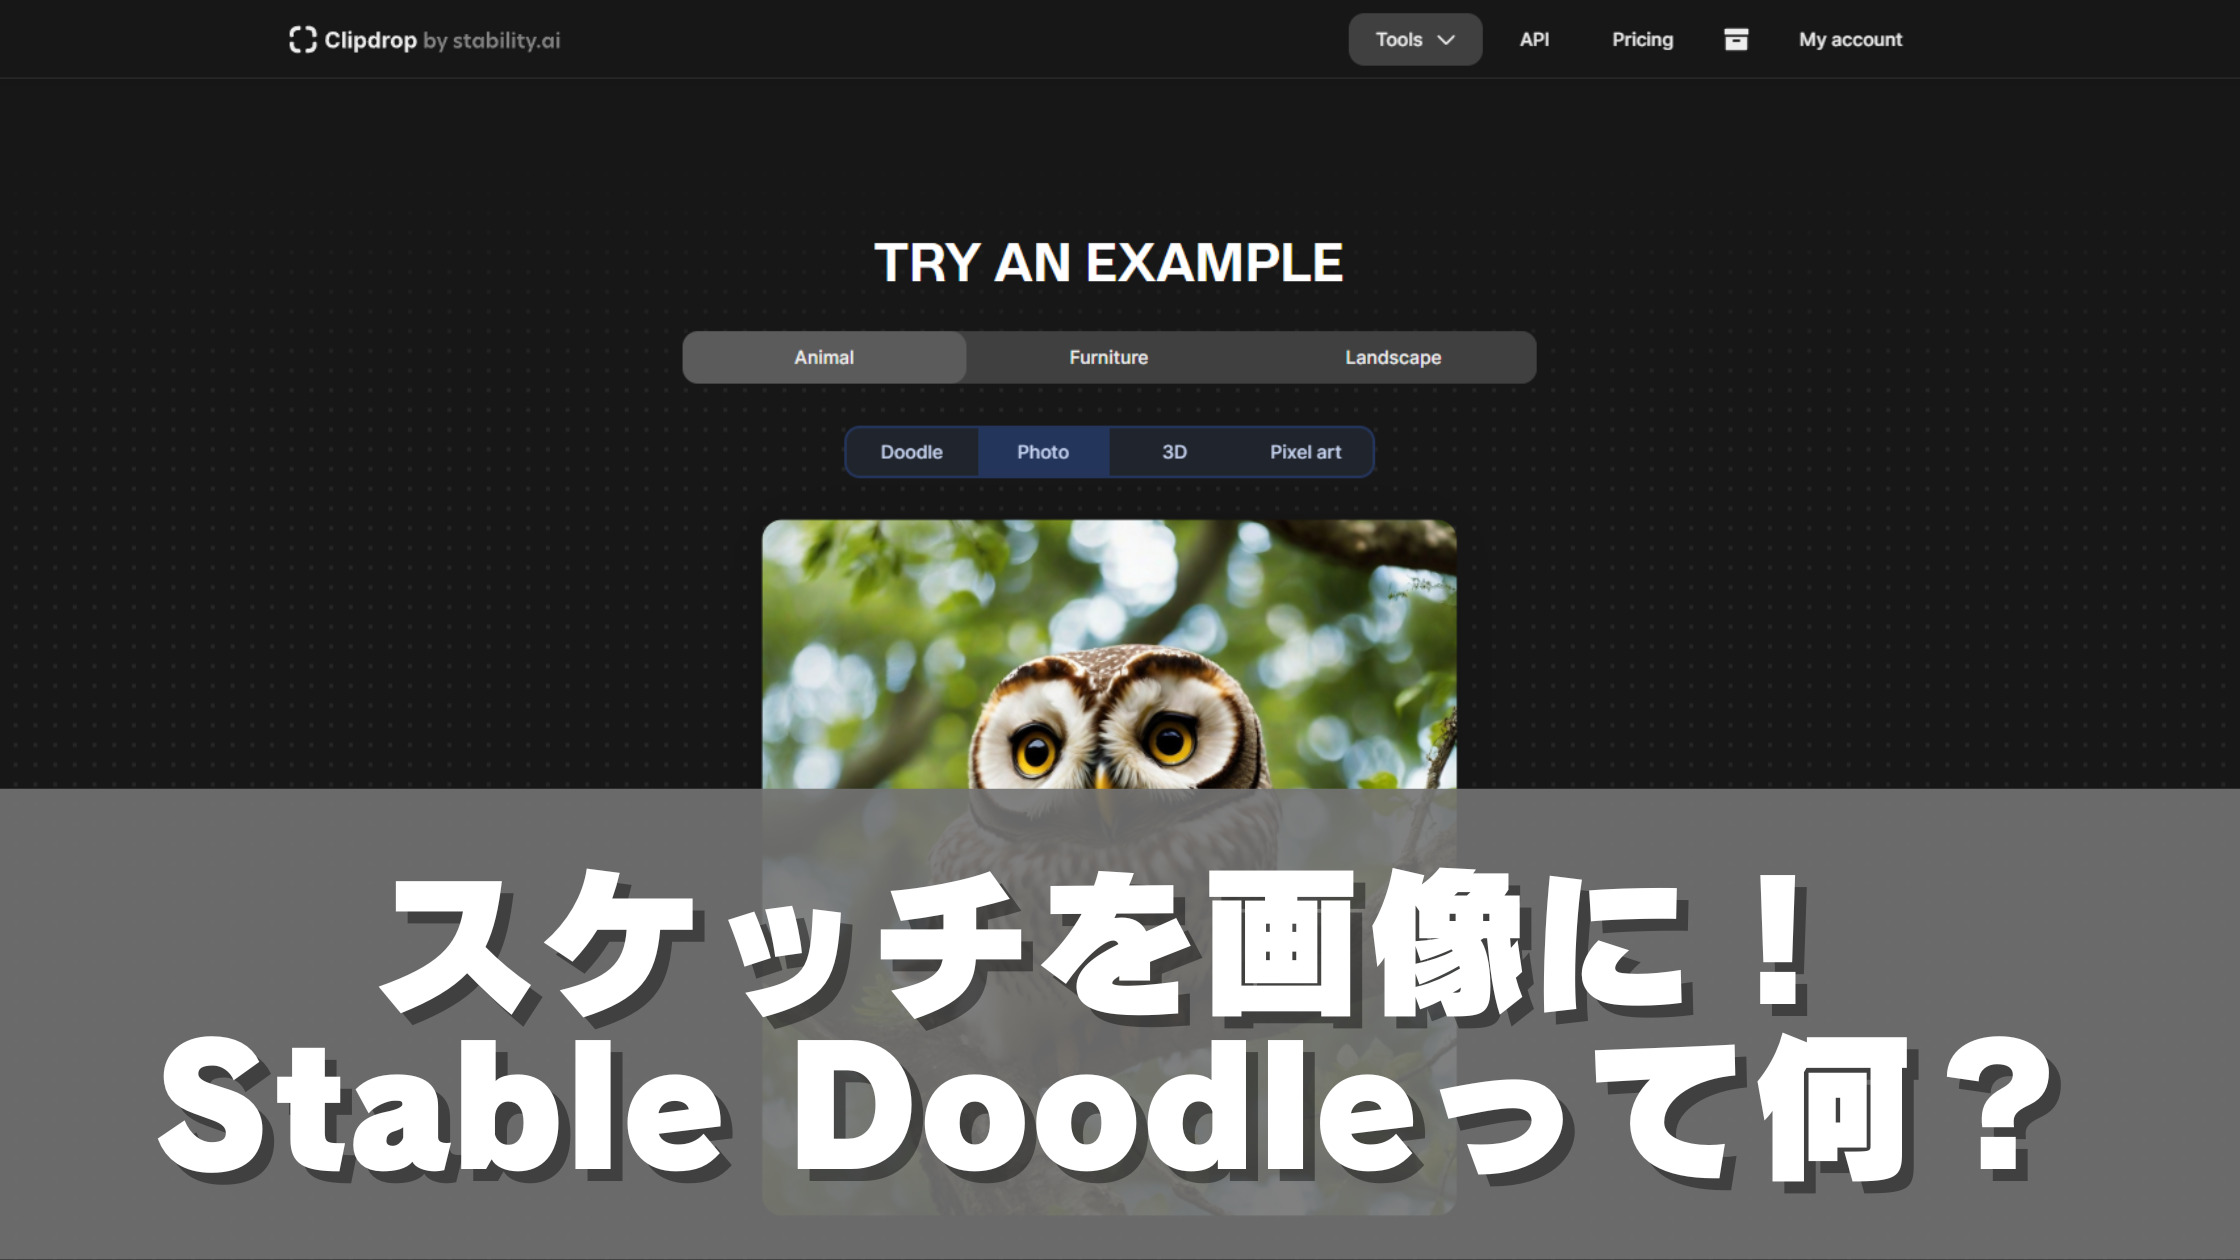 Stable Doodleって何？